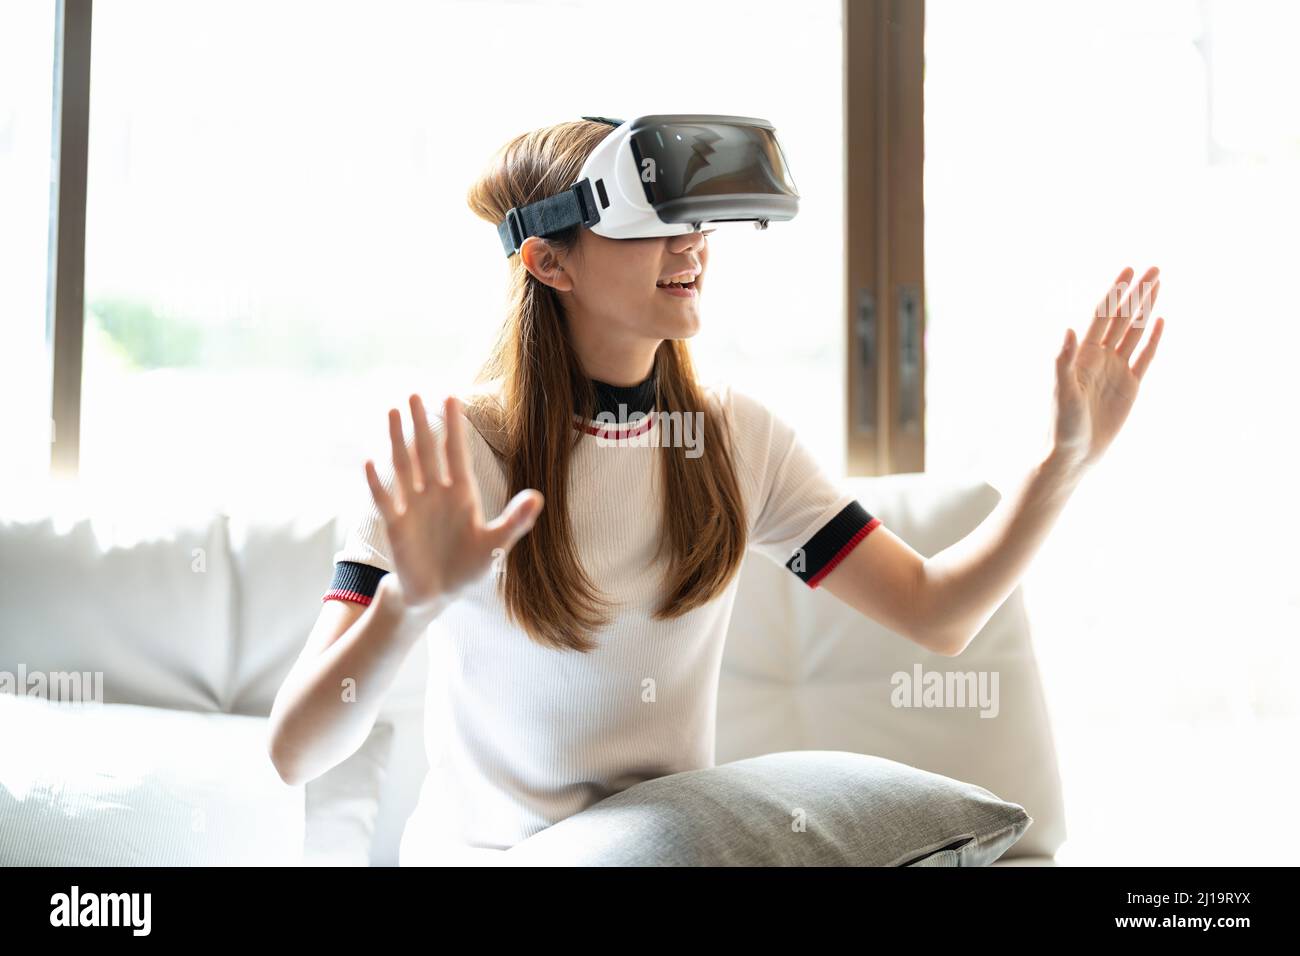 Excite asian woman playing online game with vr glasses and controller at her home Stock Photo